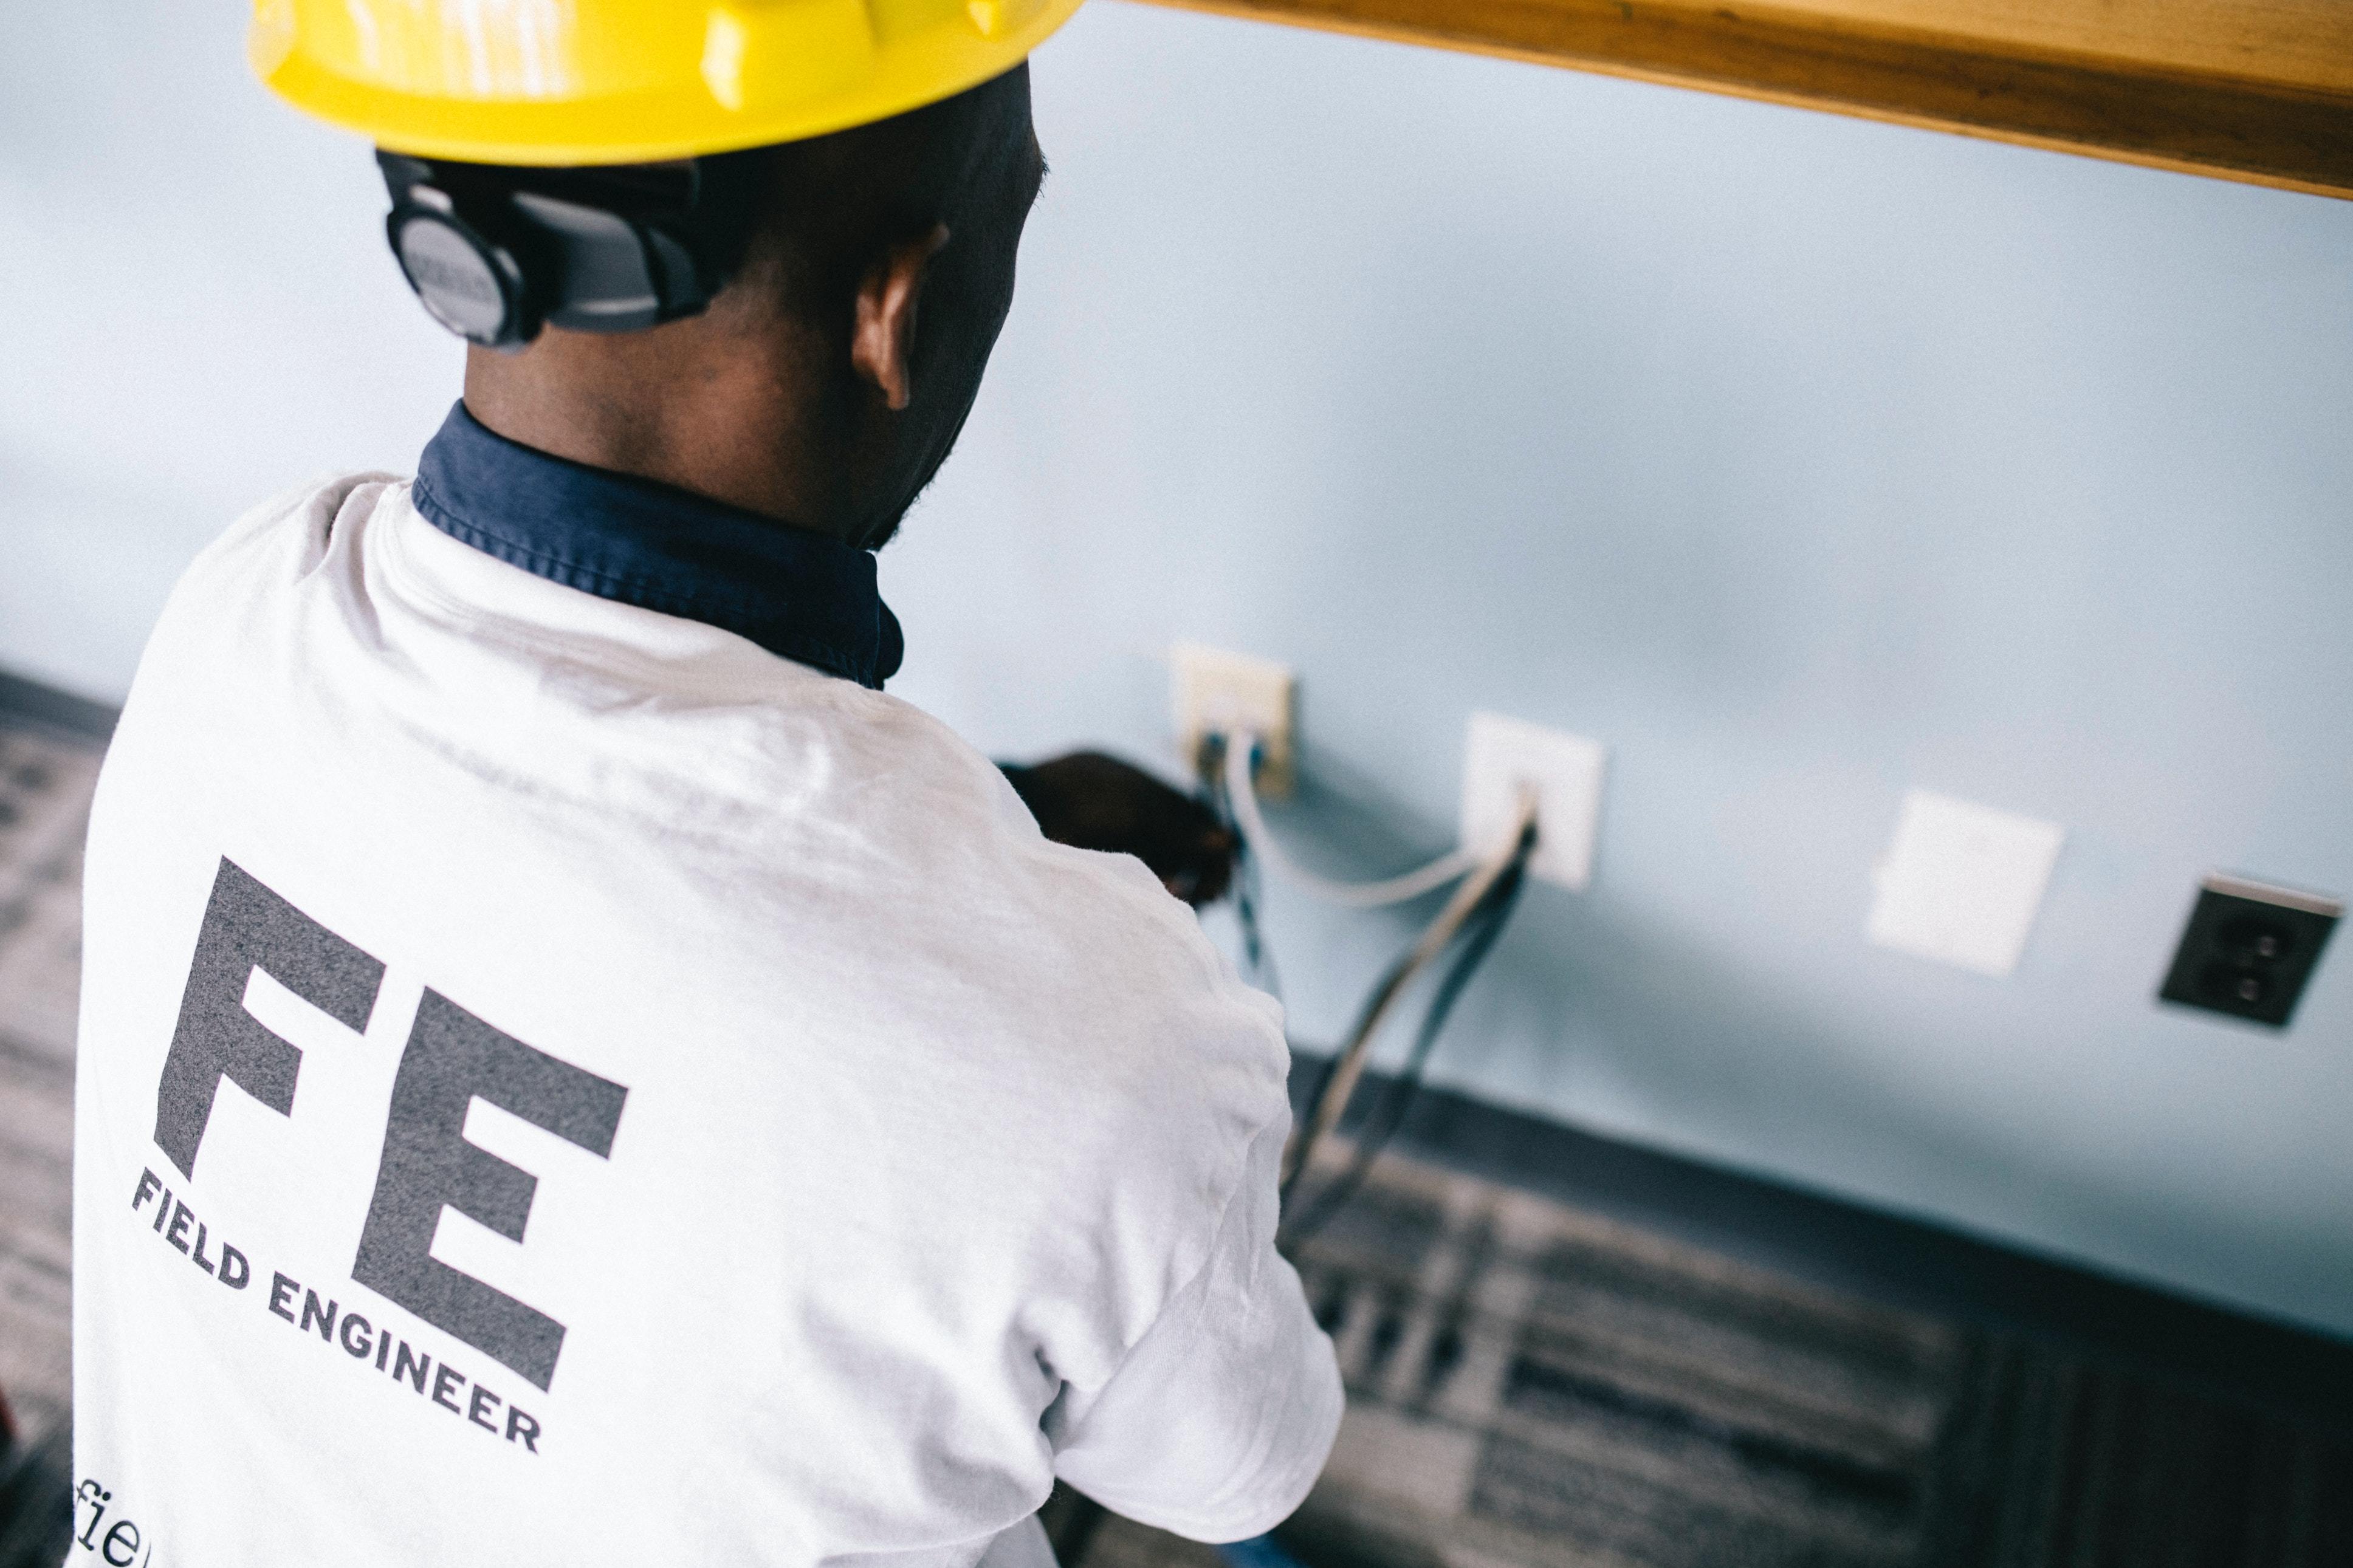 electrical engineer duties and responsibilities in construction